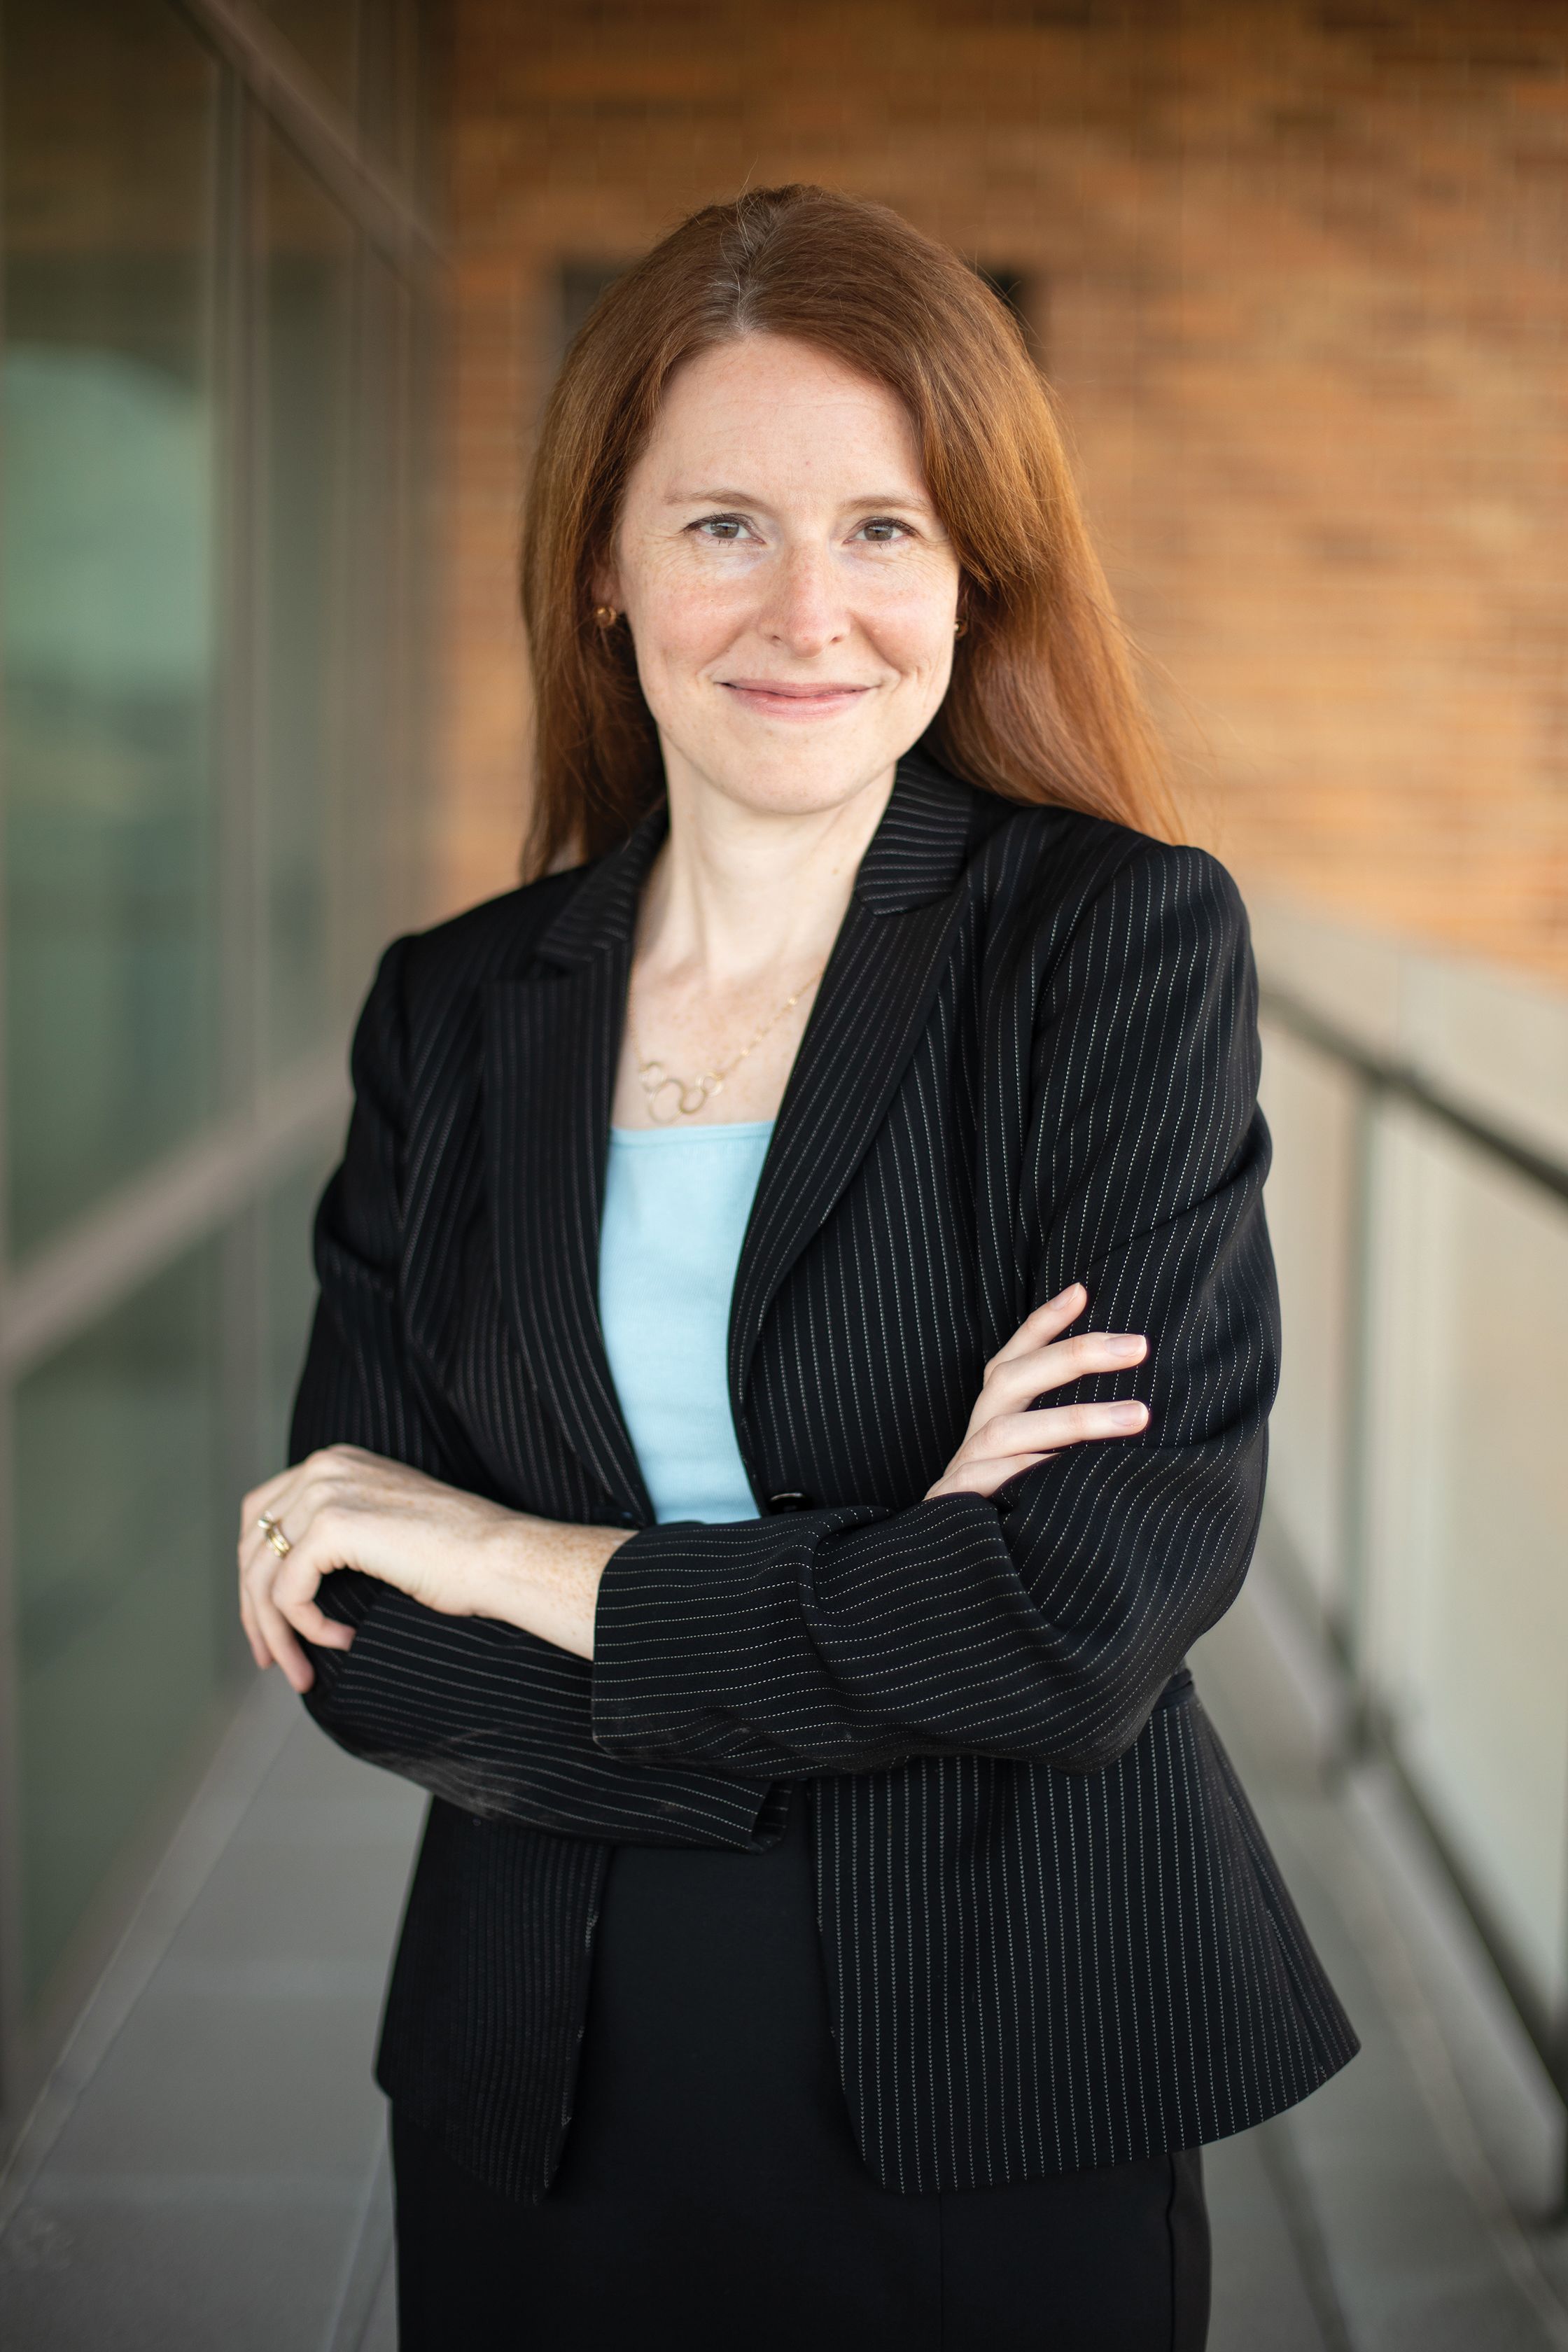 professor talia stroud poses for a portrait outside with her arms crossed